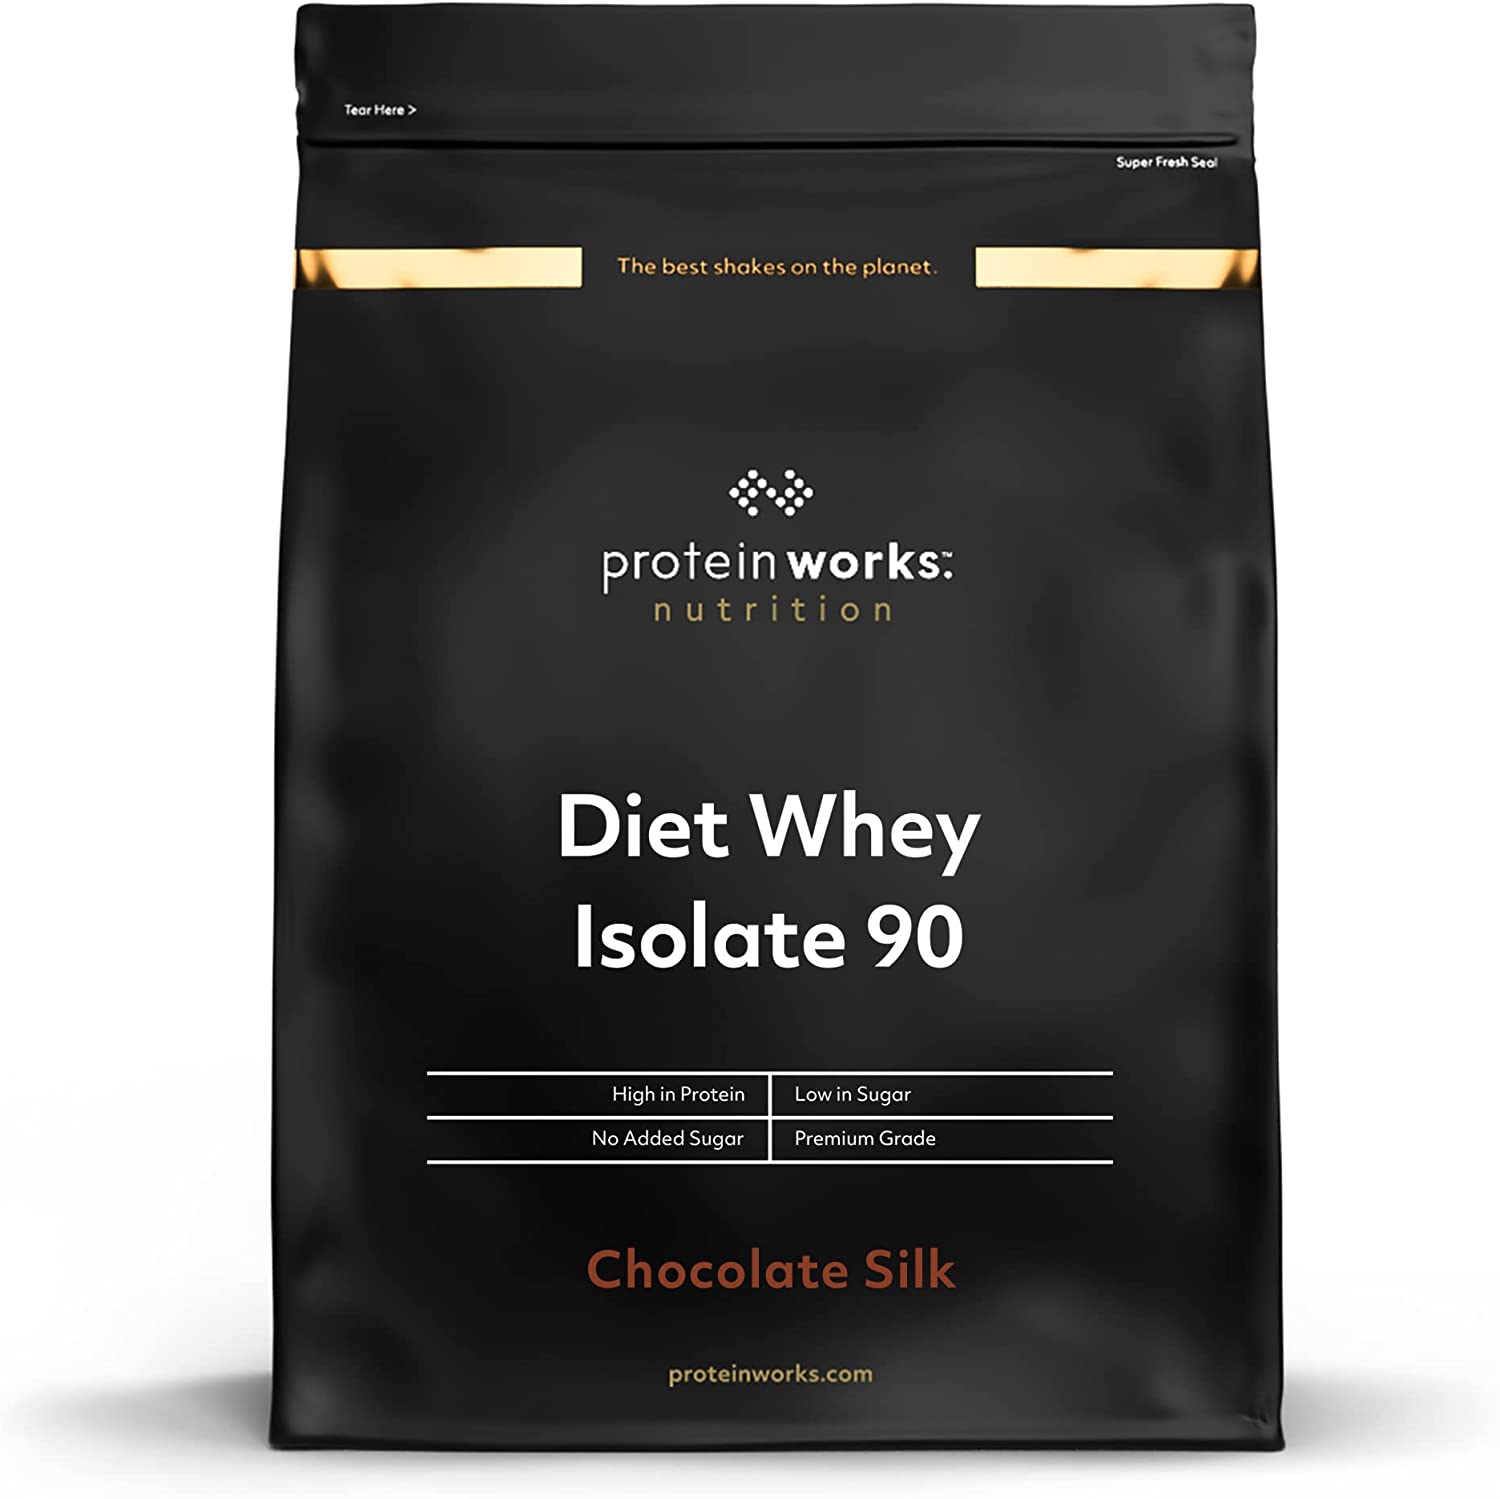 THE PROTEIN WORKS Diet Whey Isolate 90